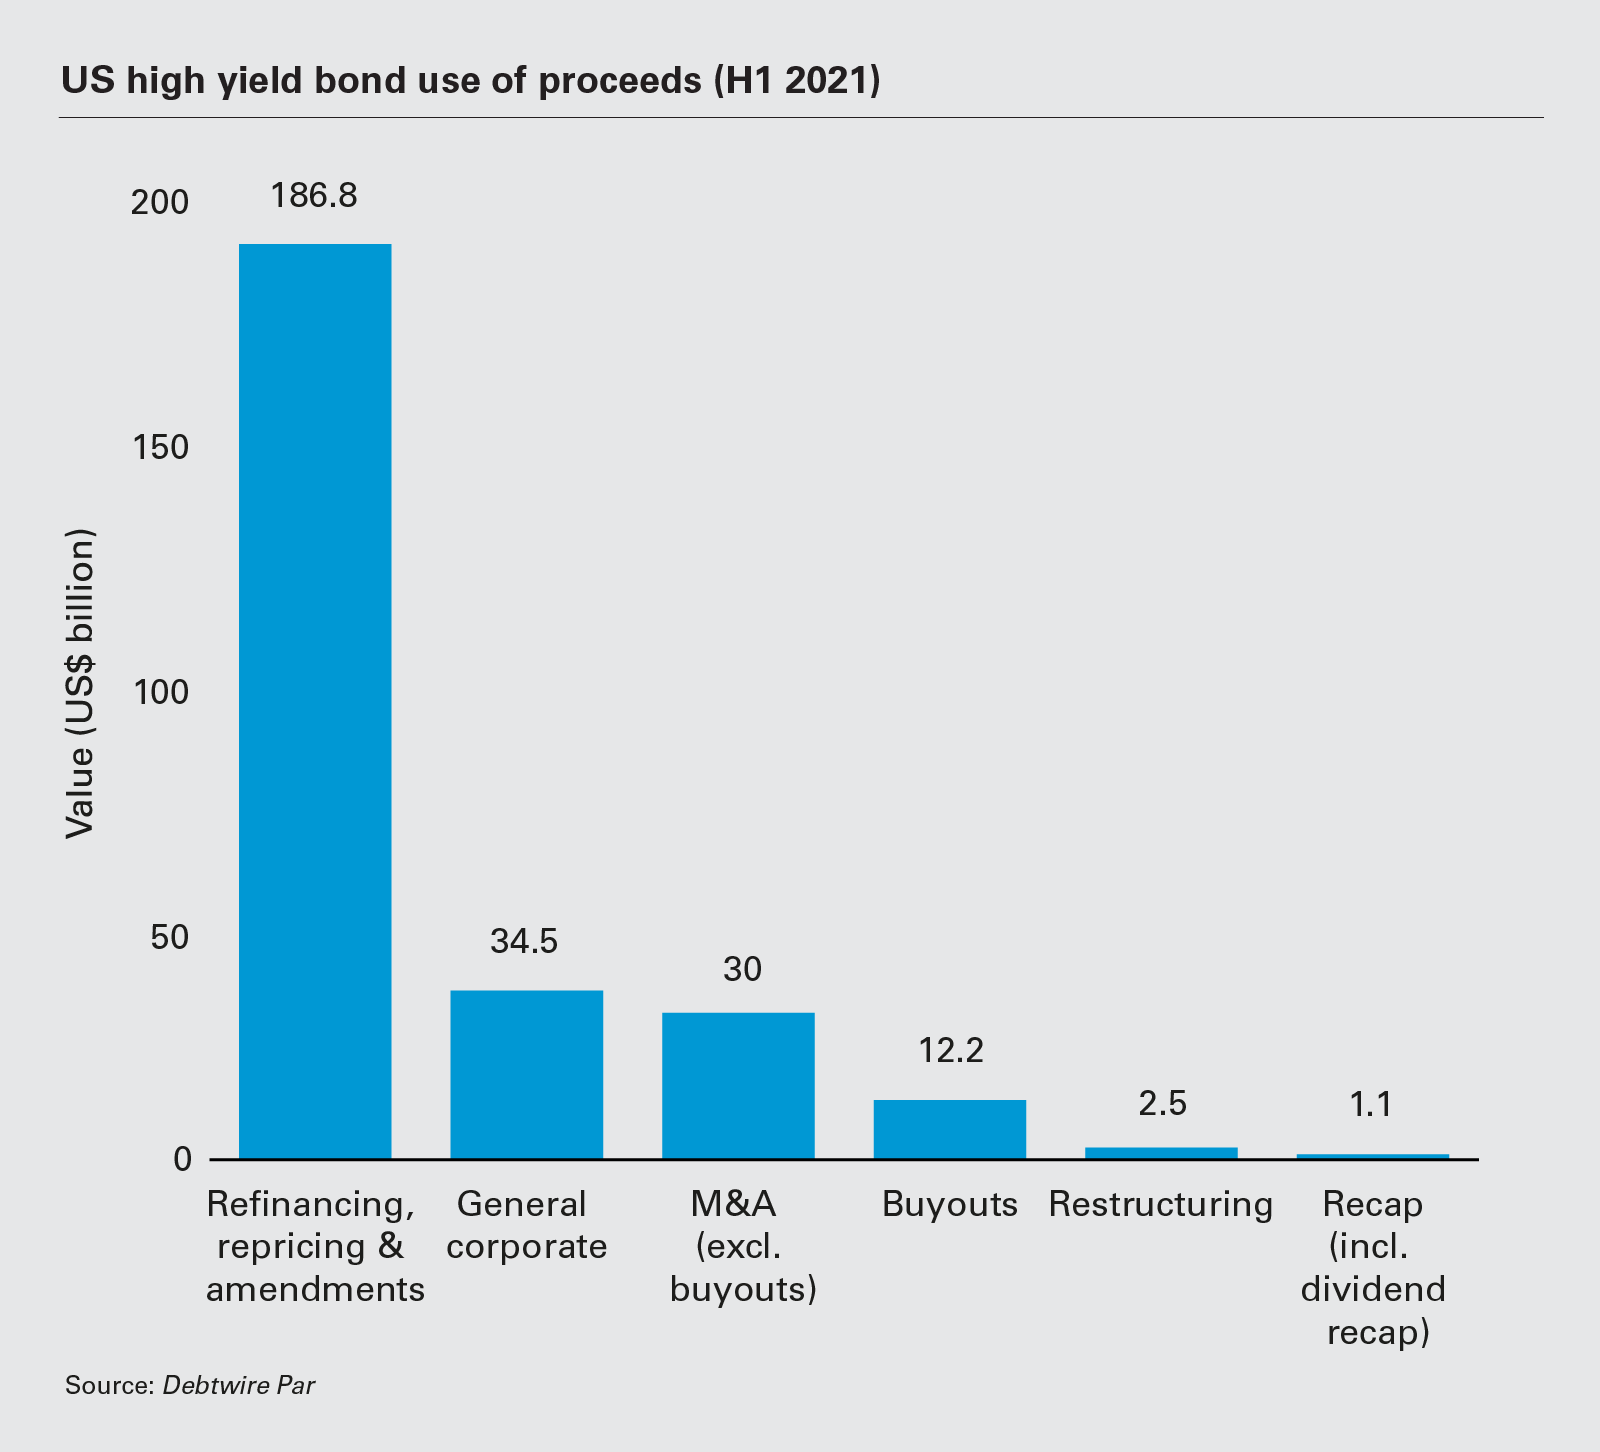 US high yield bond use of proceeds (H1 2021)